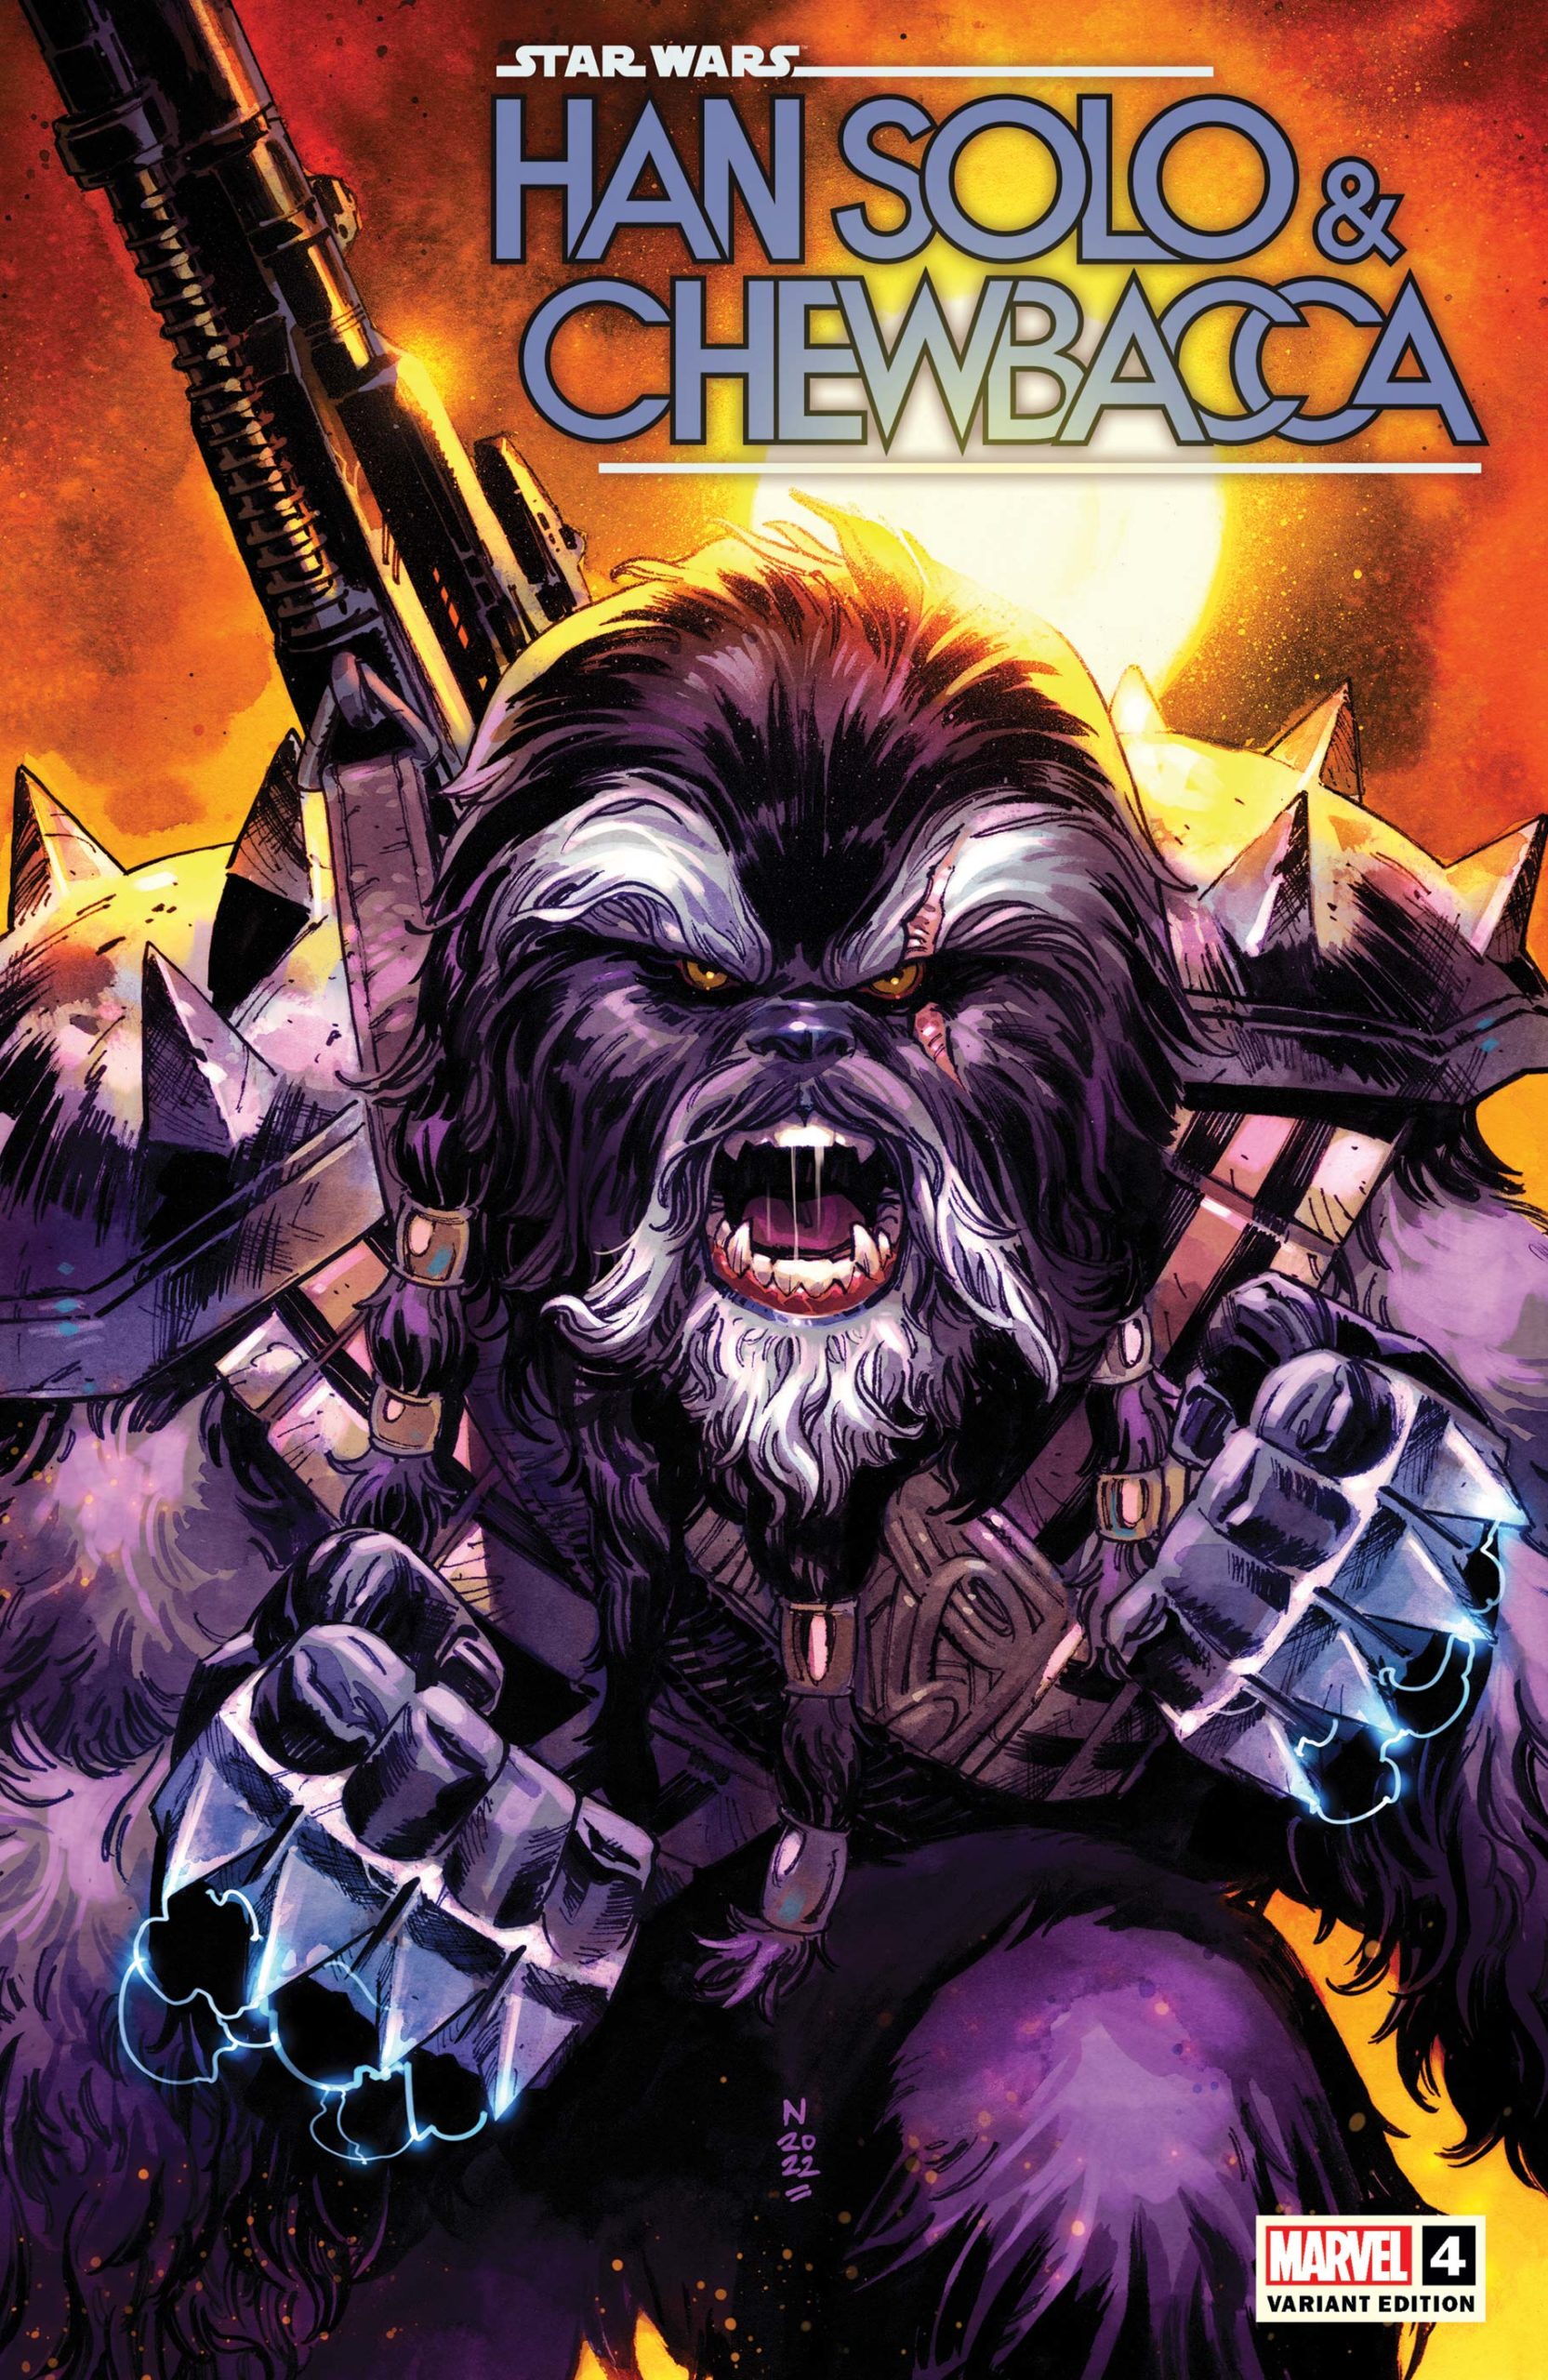 Han Solo & Chewbacca #4 (Nic Klein Variant Cover)